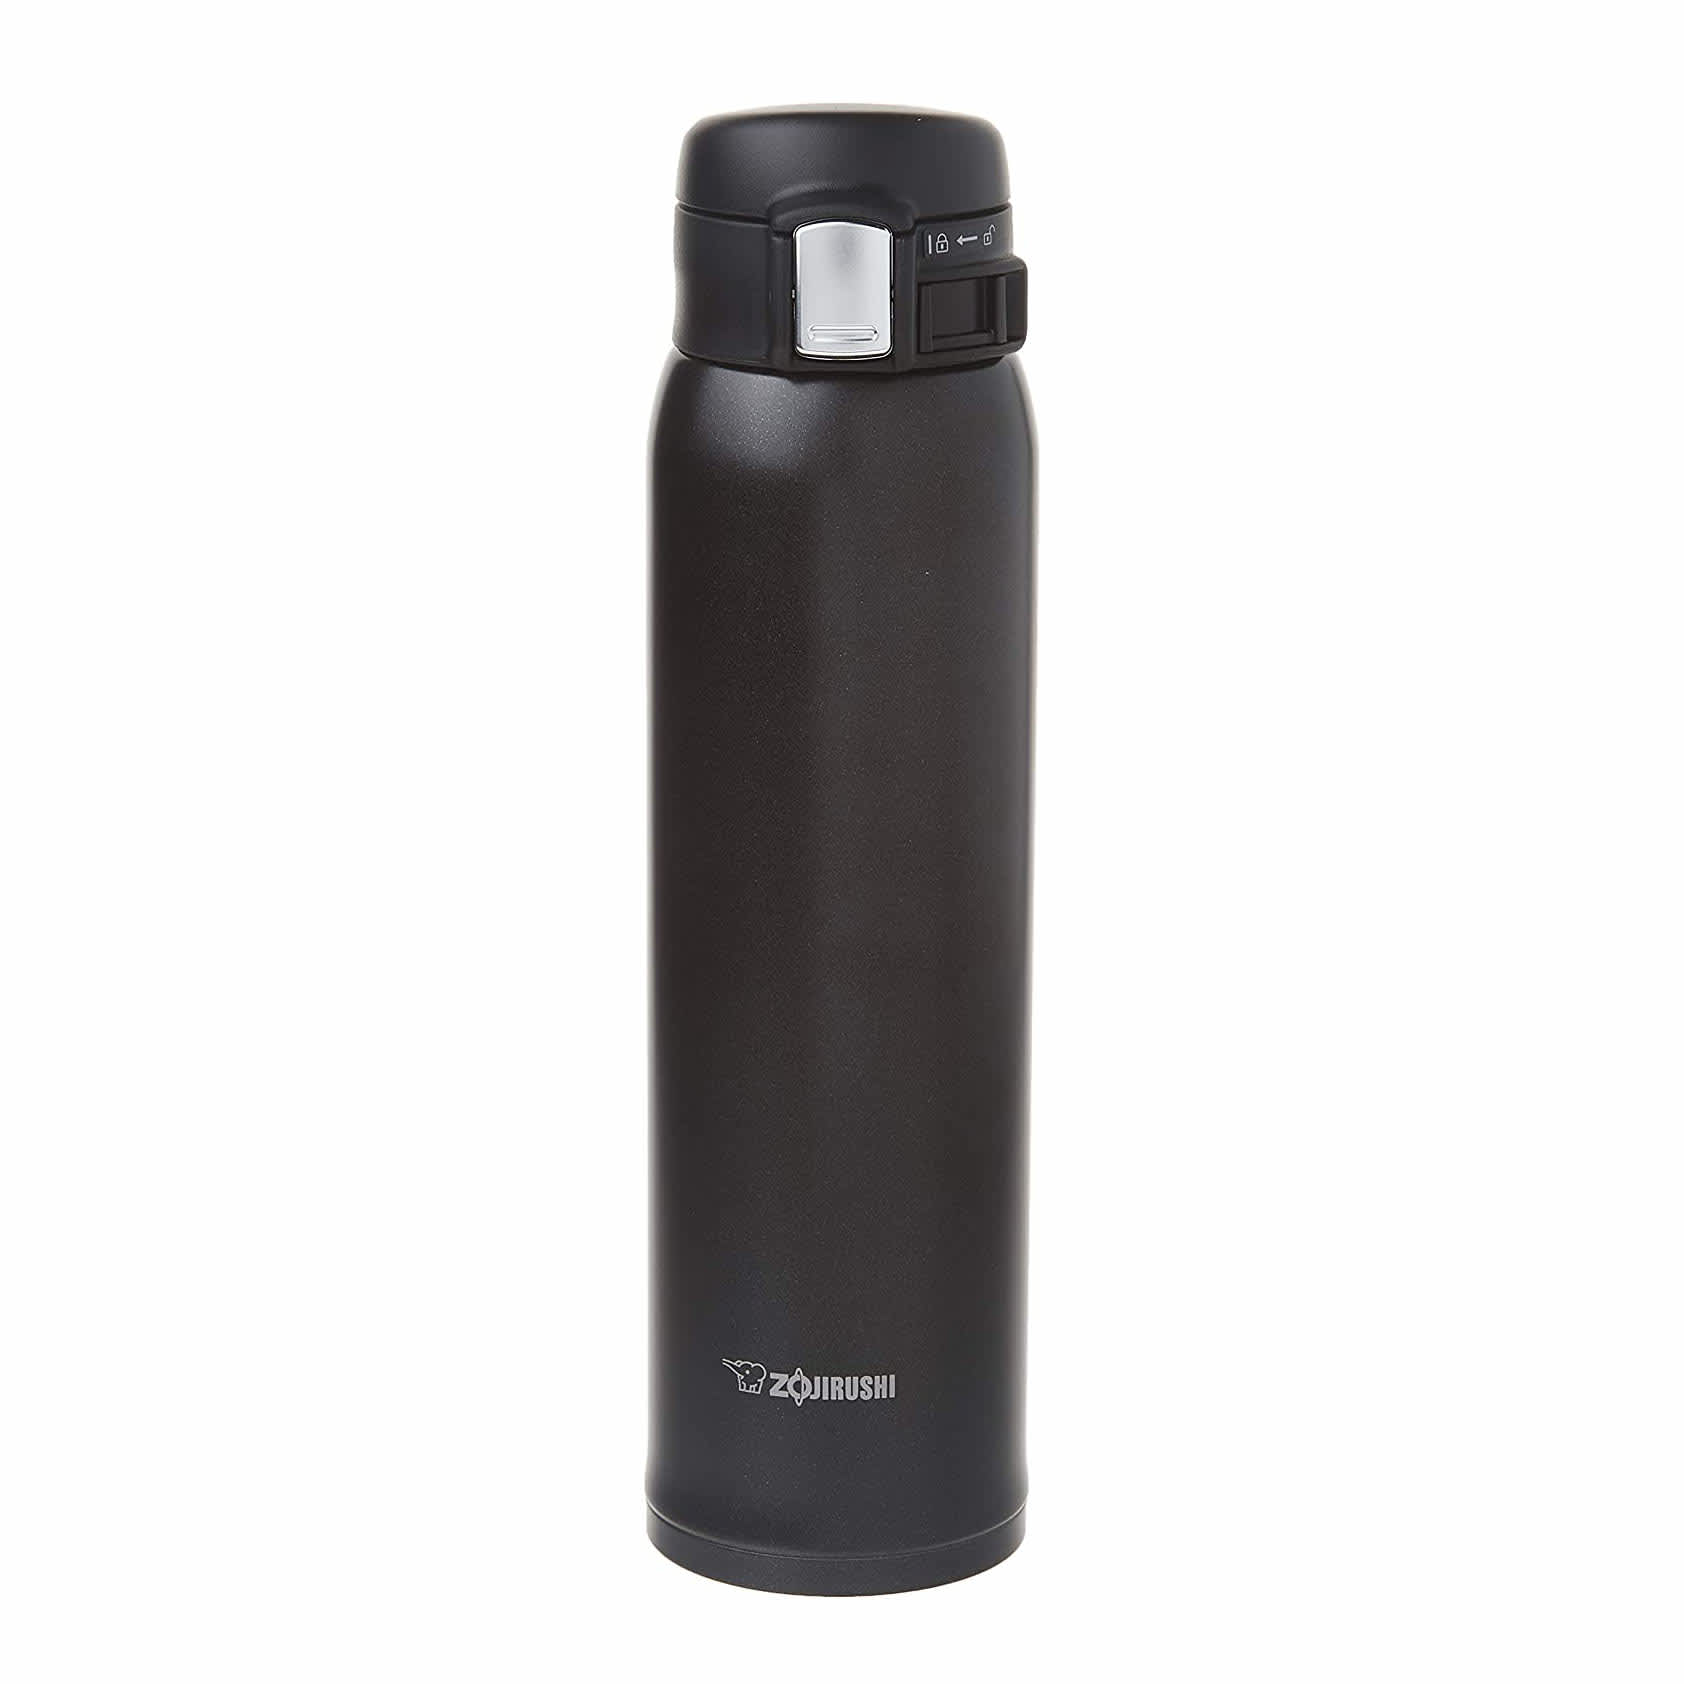 Zojirushi coffee thermos review and temperature test 